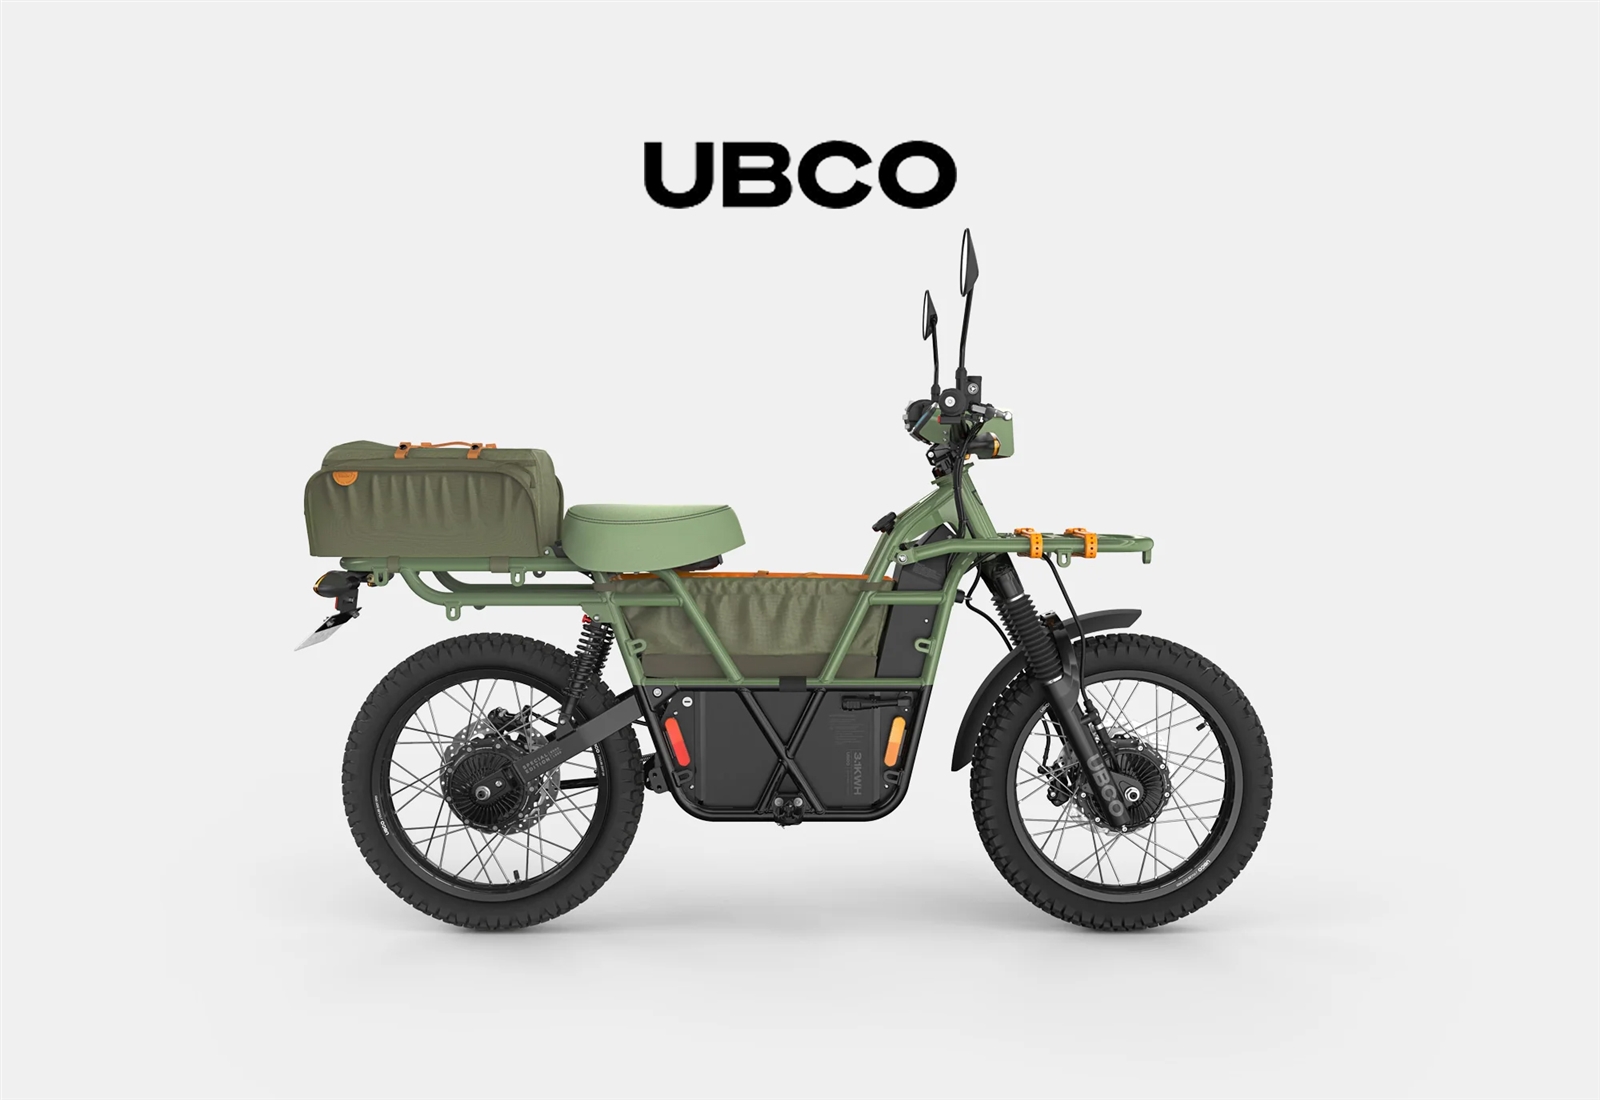 Ubco is the latest addition to our brands - Ridewill Magazine